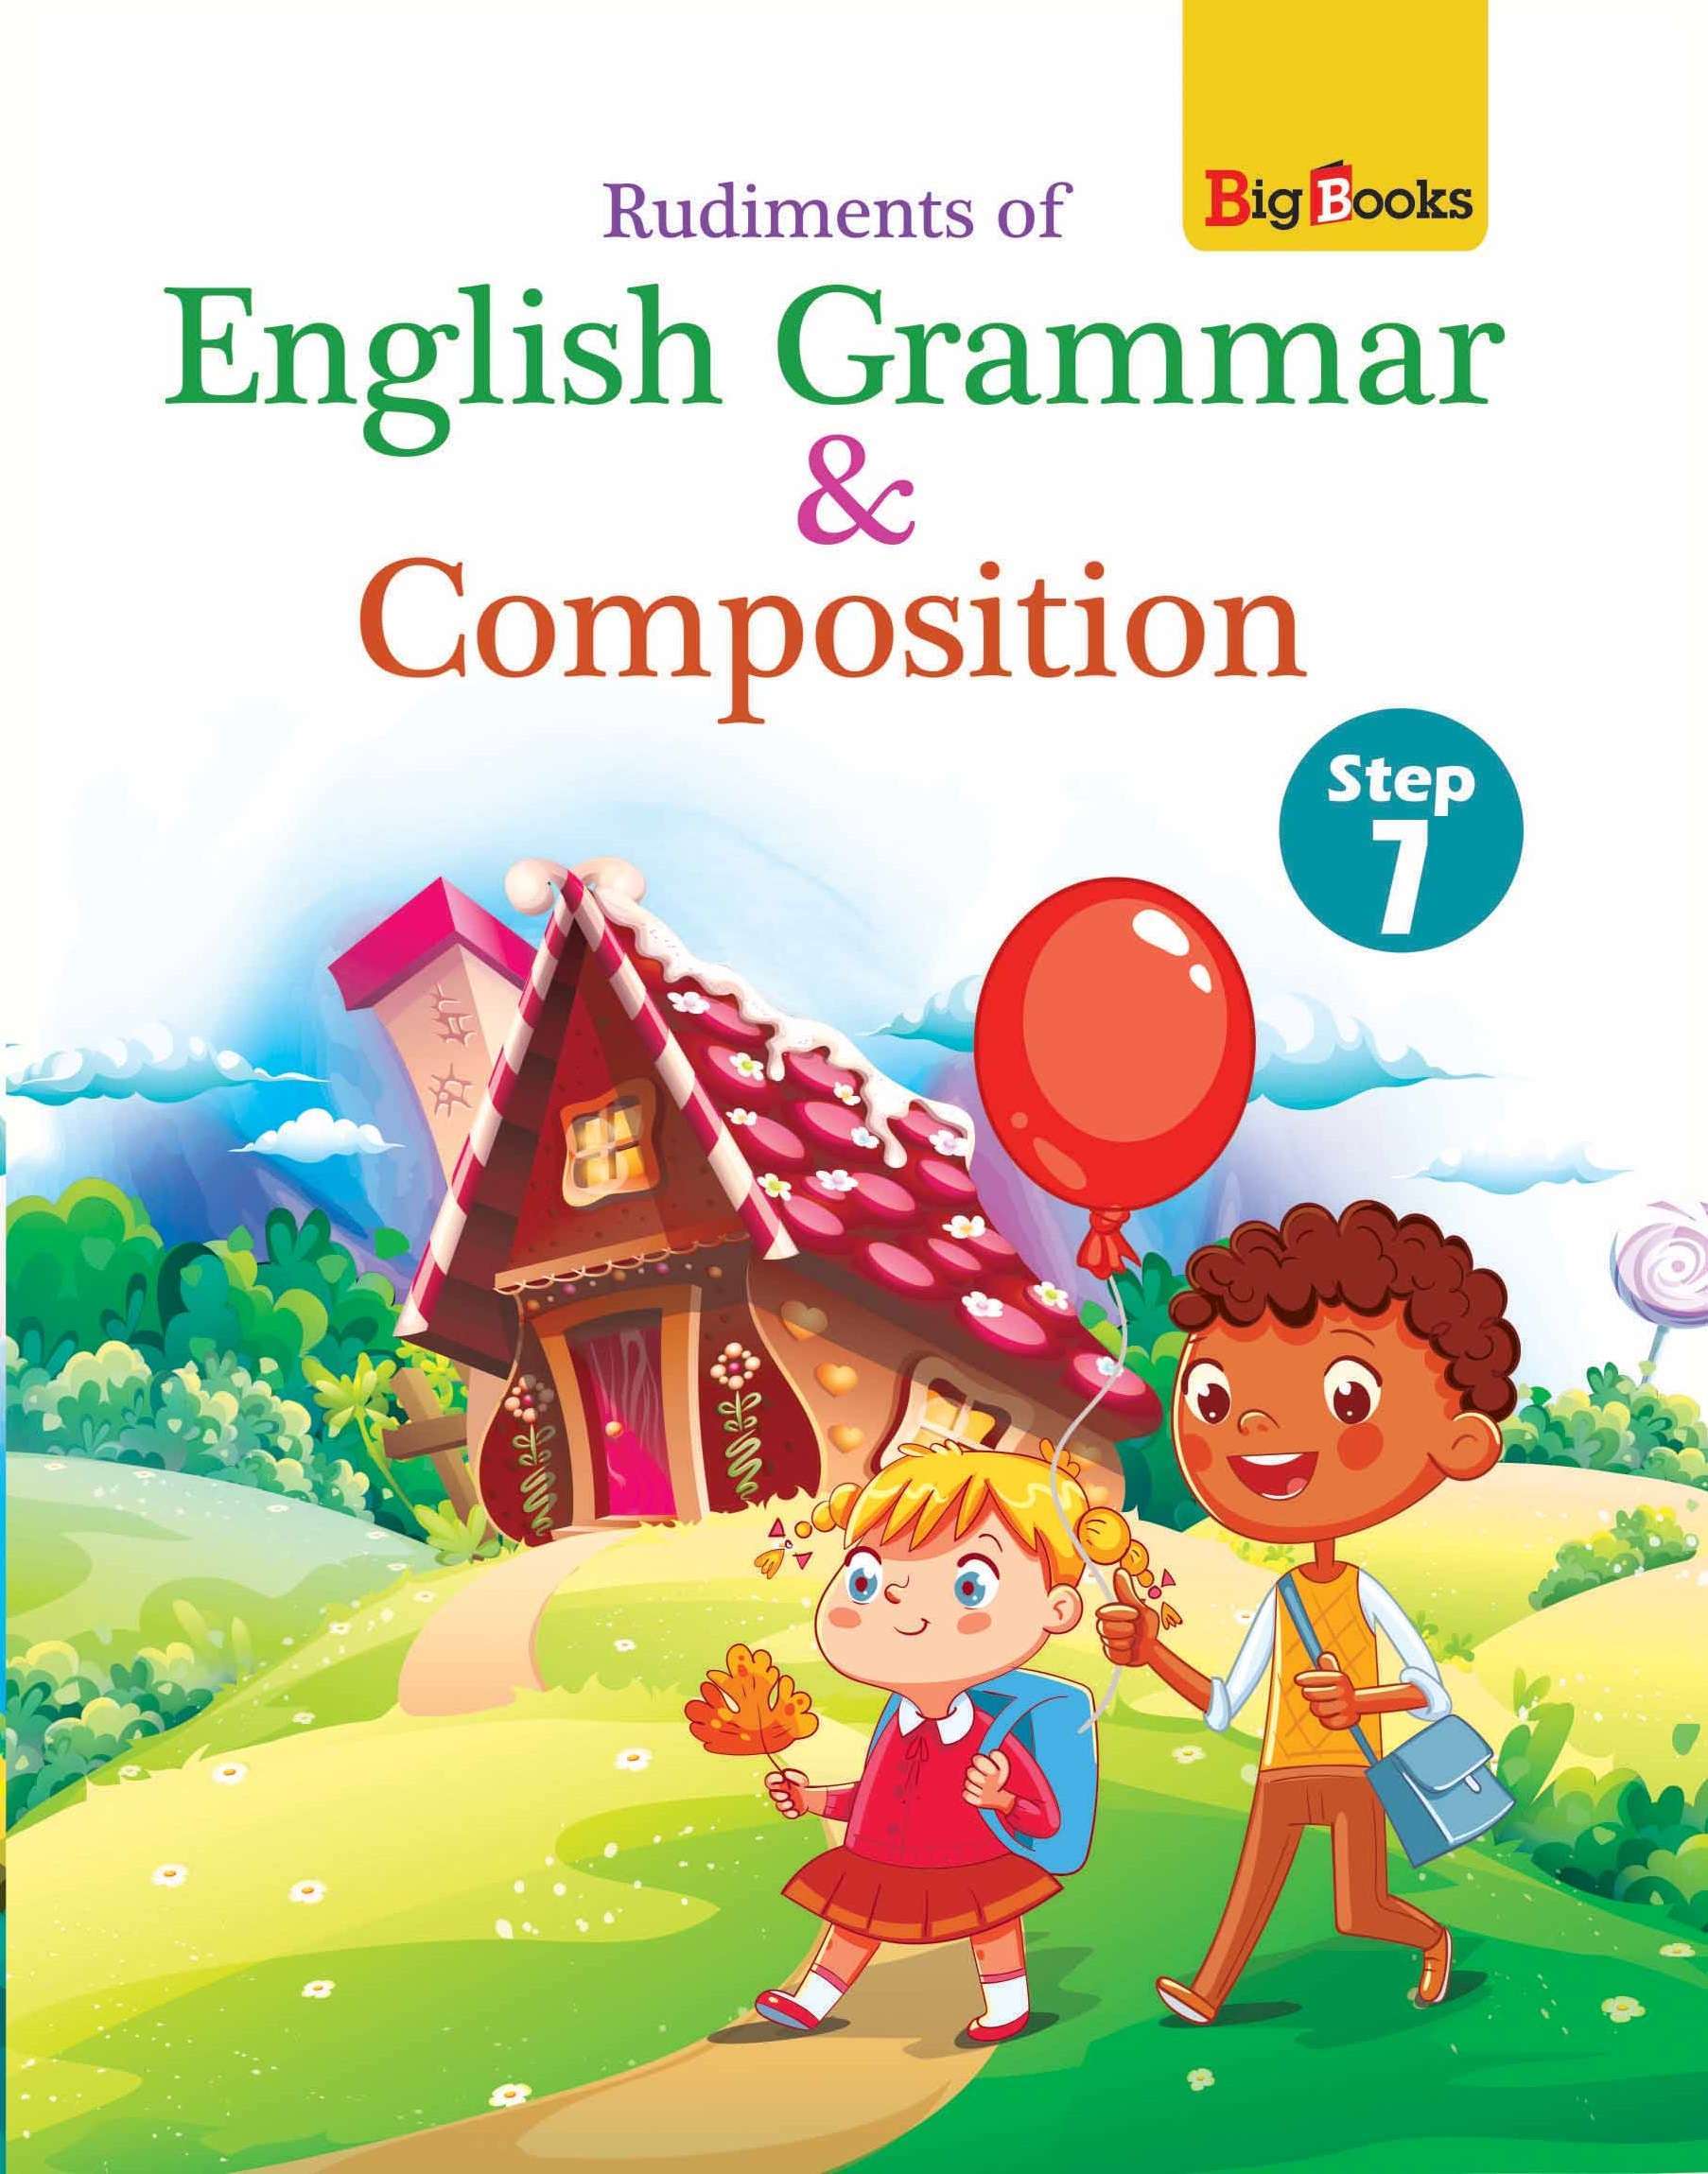 Buy English grammer book for 7 online